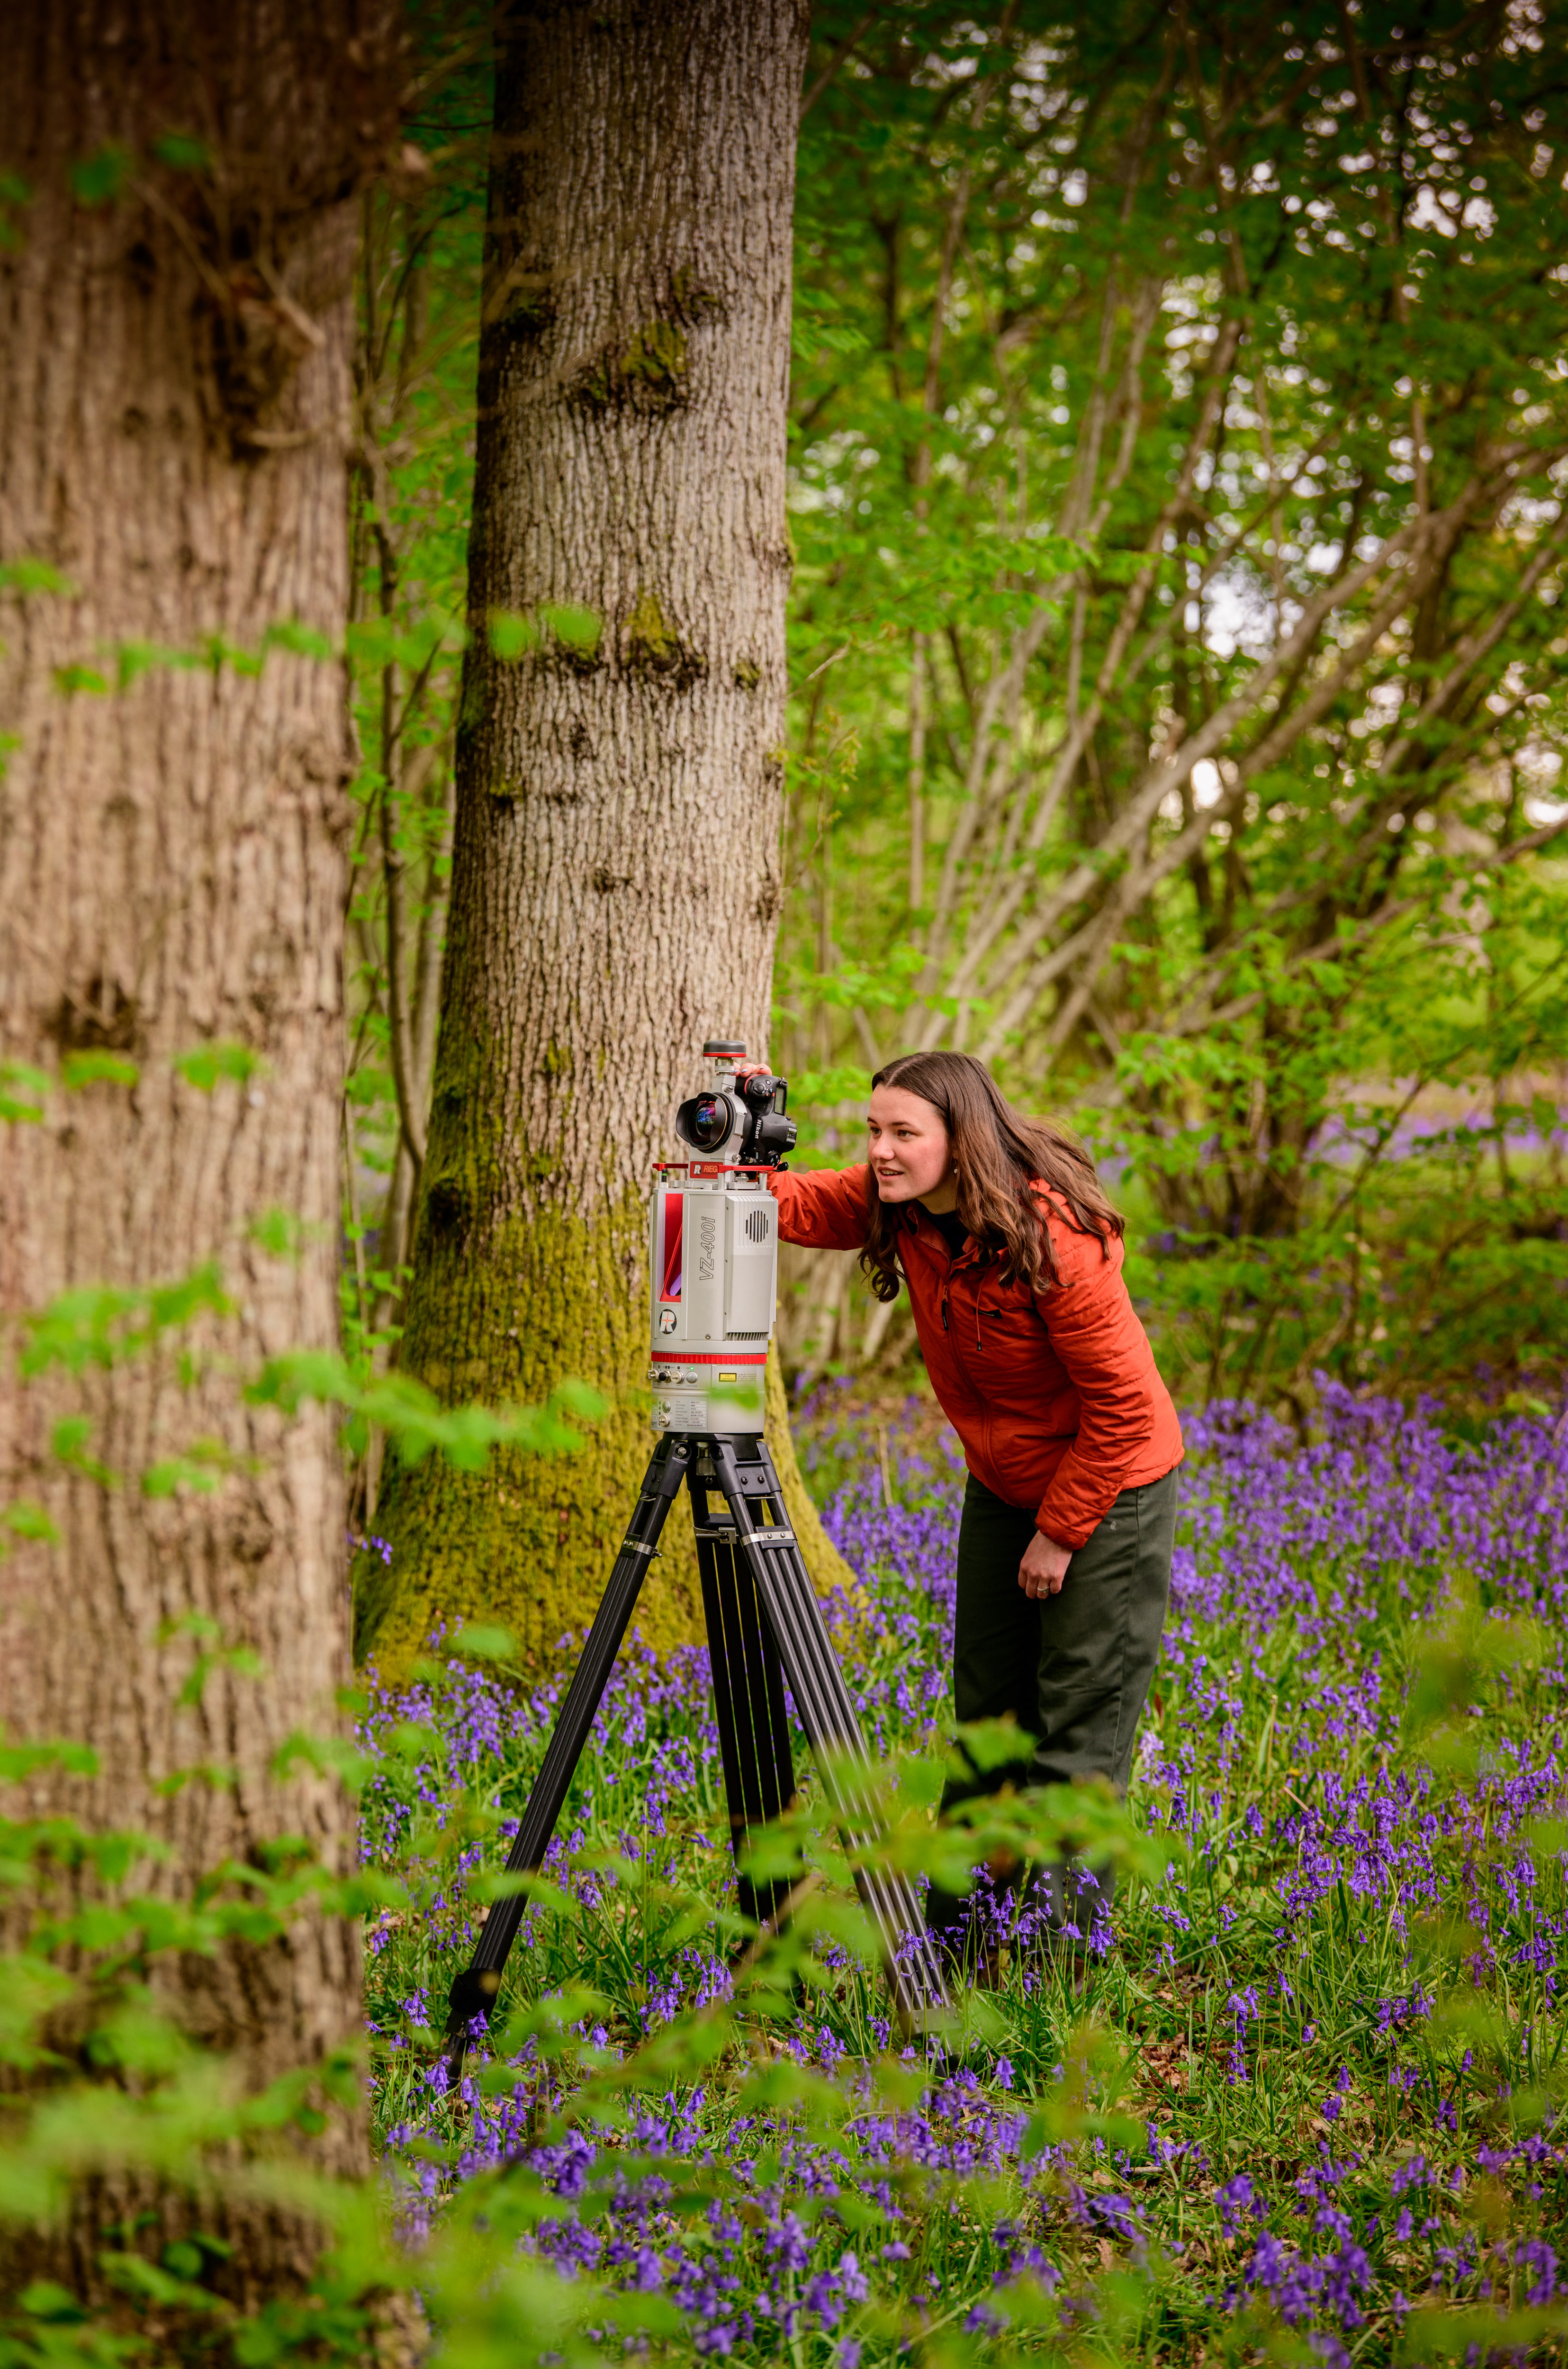 Researcher looking into a camera in a field of bluebells